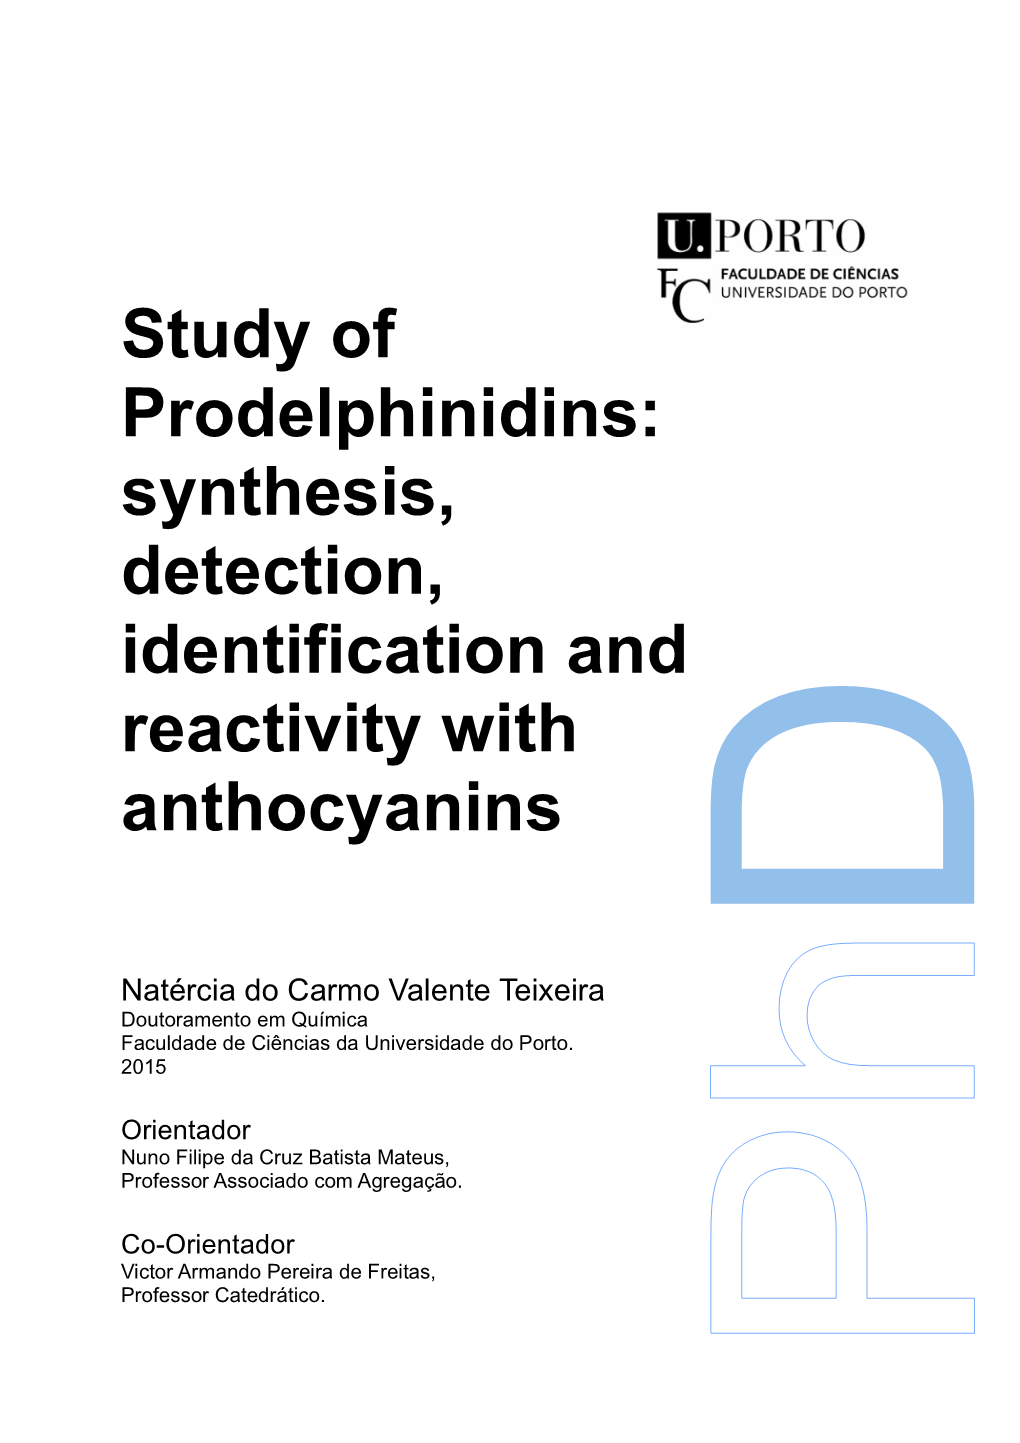 Study of Prodelphinidins: Synthesis, Detection, Identification and Reactivity with Anthocyanins